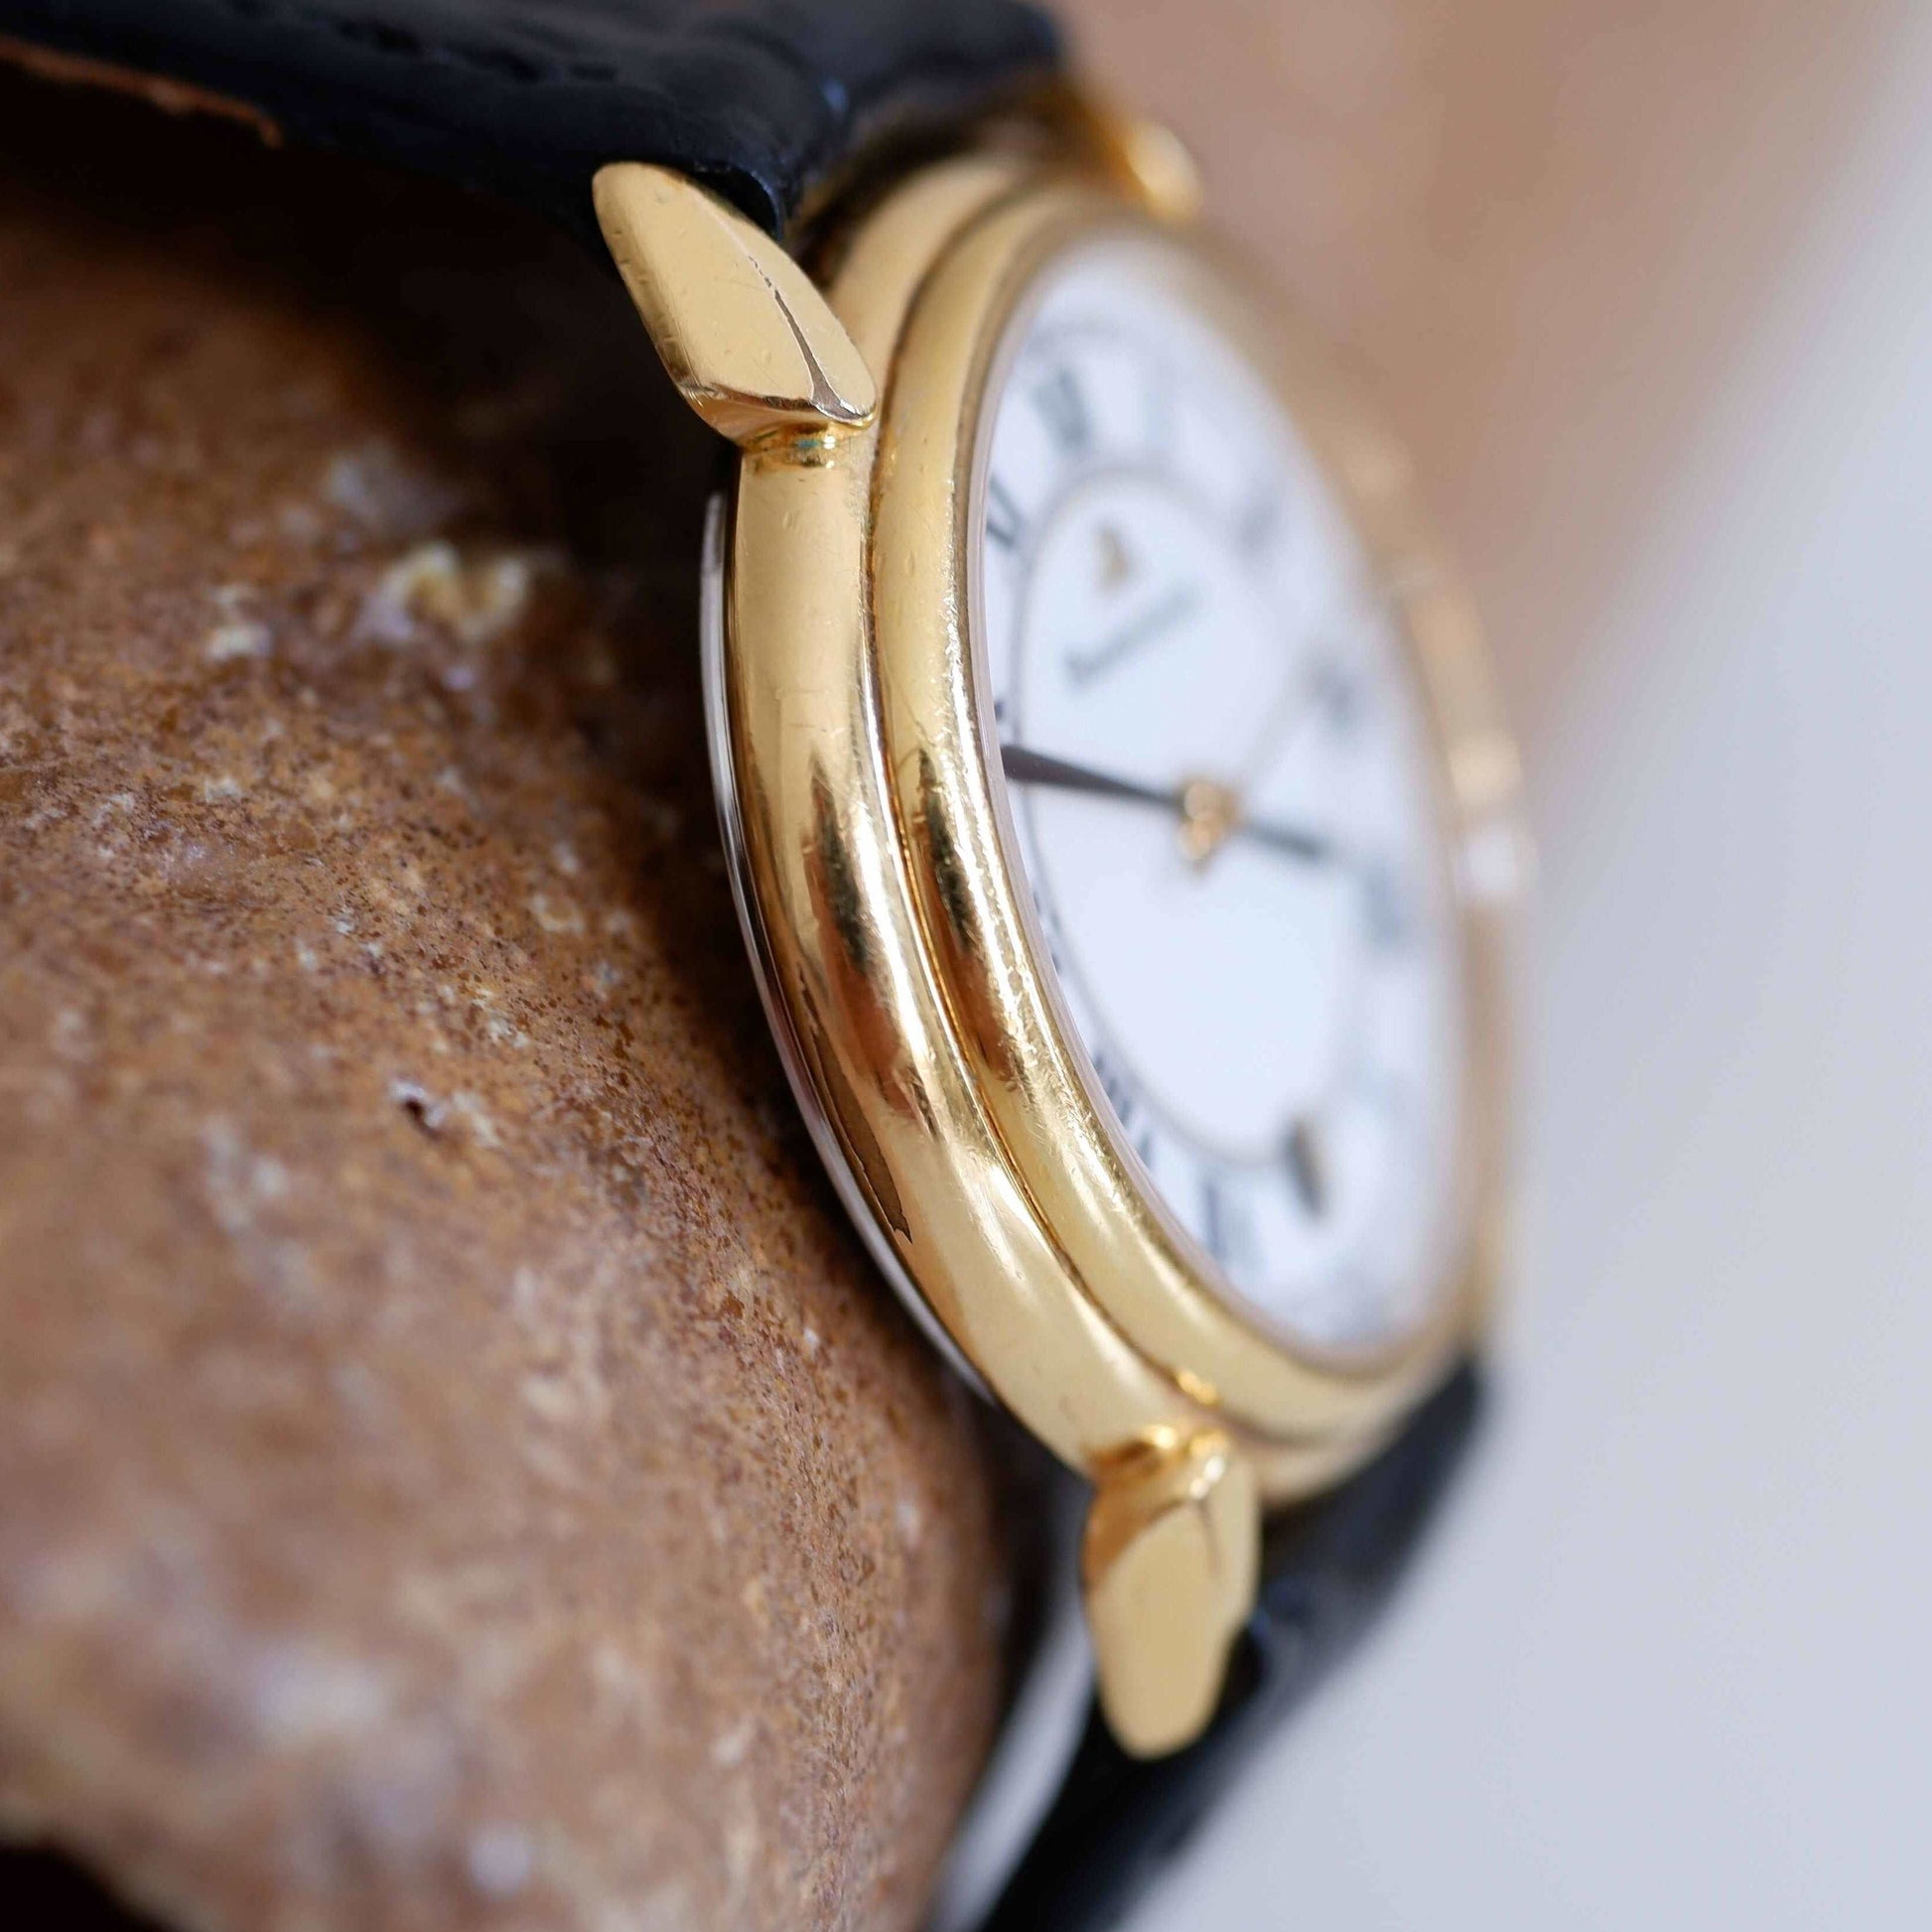 Maurice Lacroix Vintage Ladies Watch: 90s Golden with Classic Roman Numerals | Side View Left